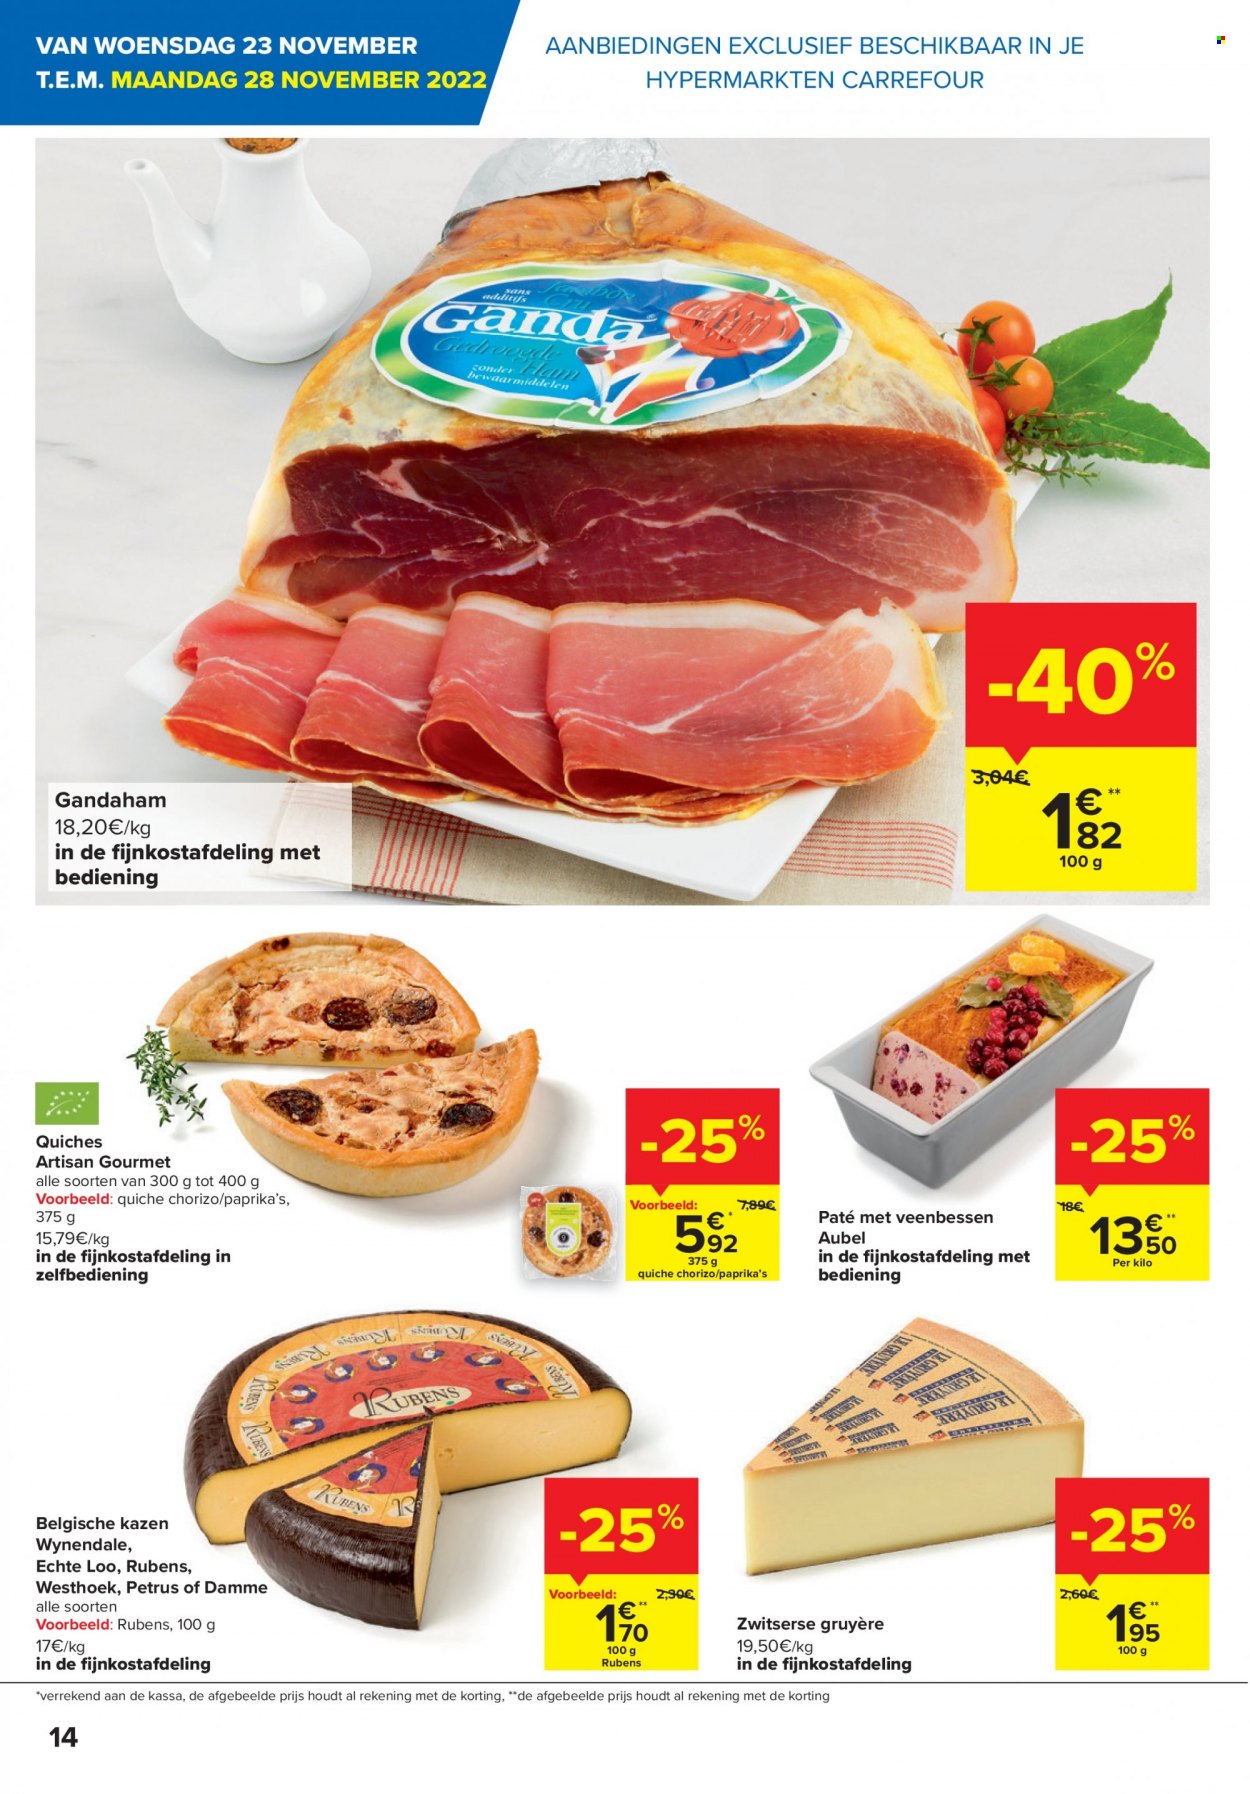 Catalogue Carrefour hypermarkt - 23.11.2022 - 5.12.2022. Page 14.